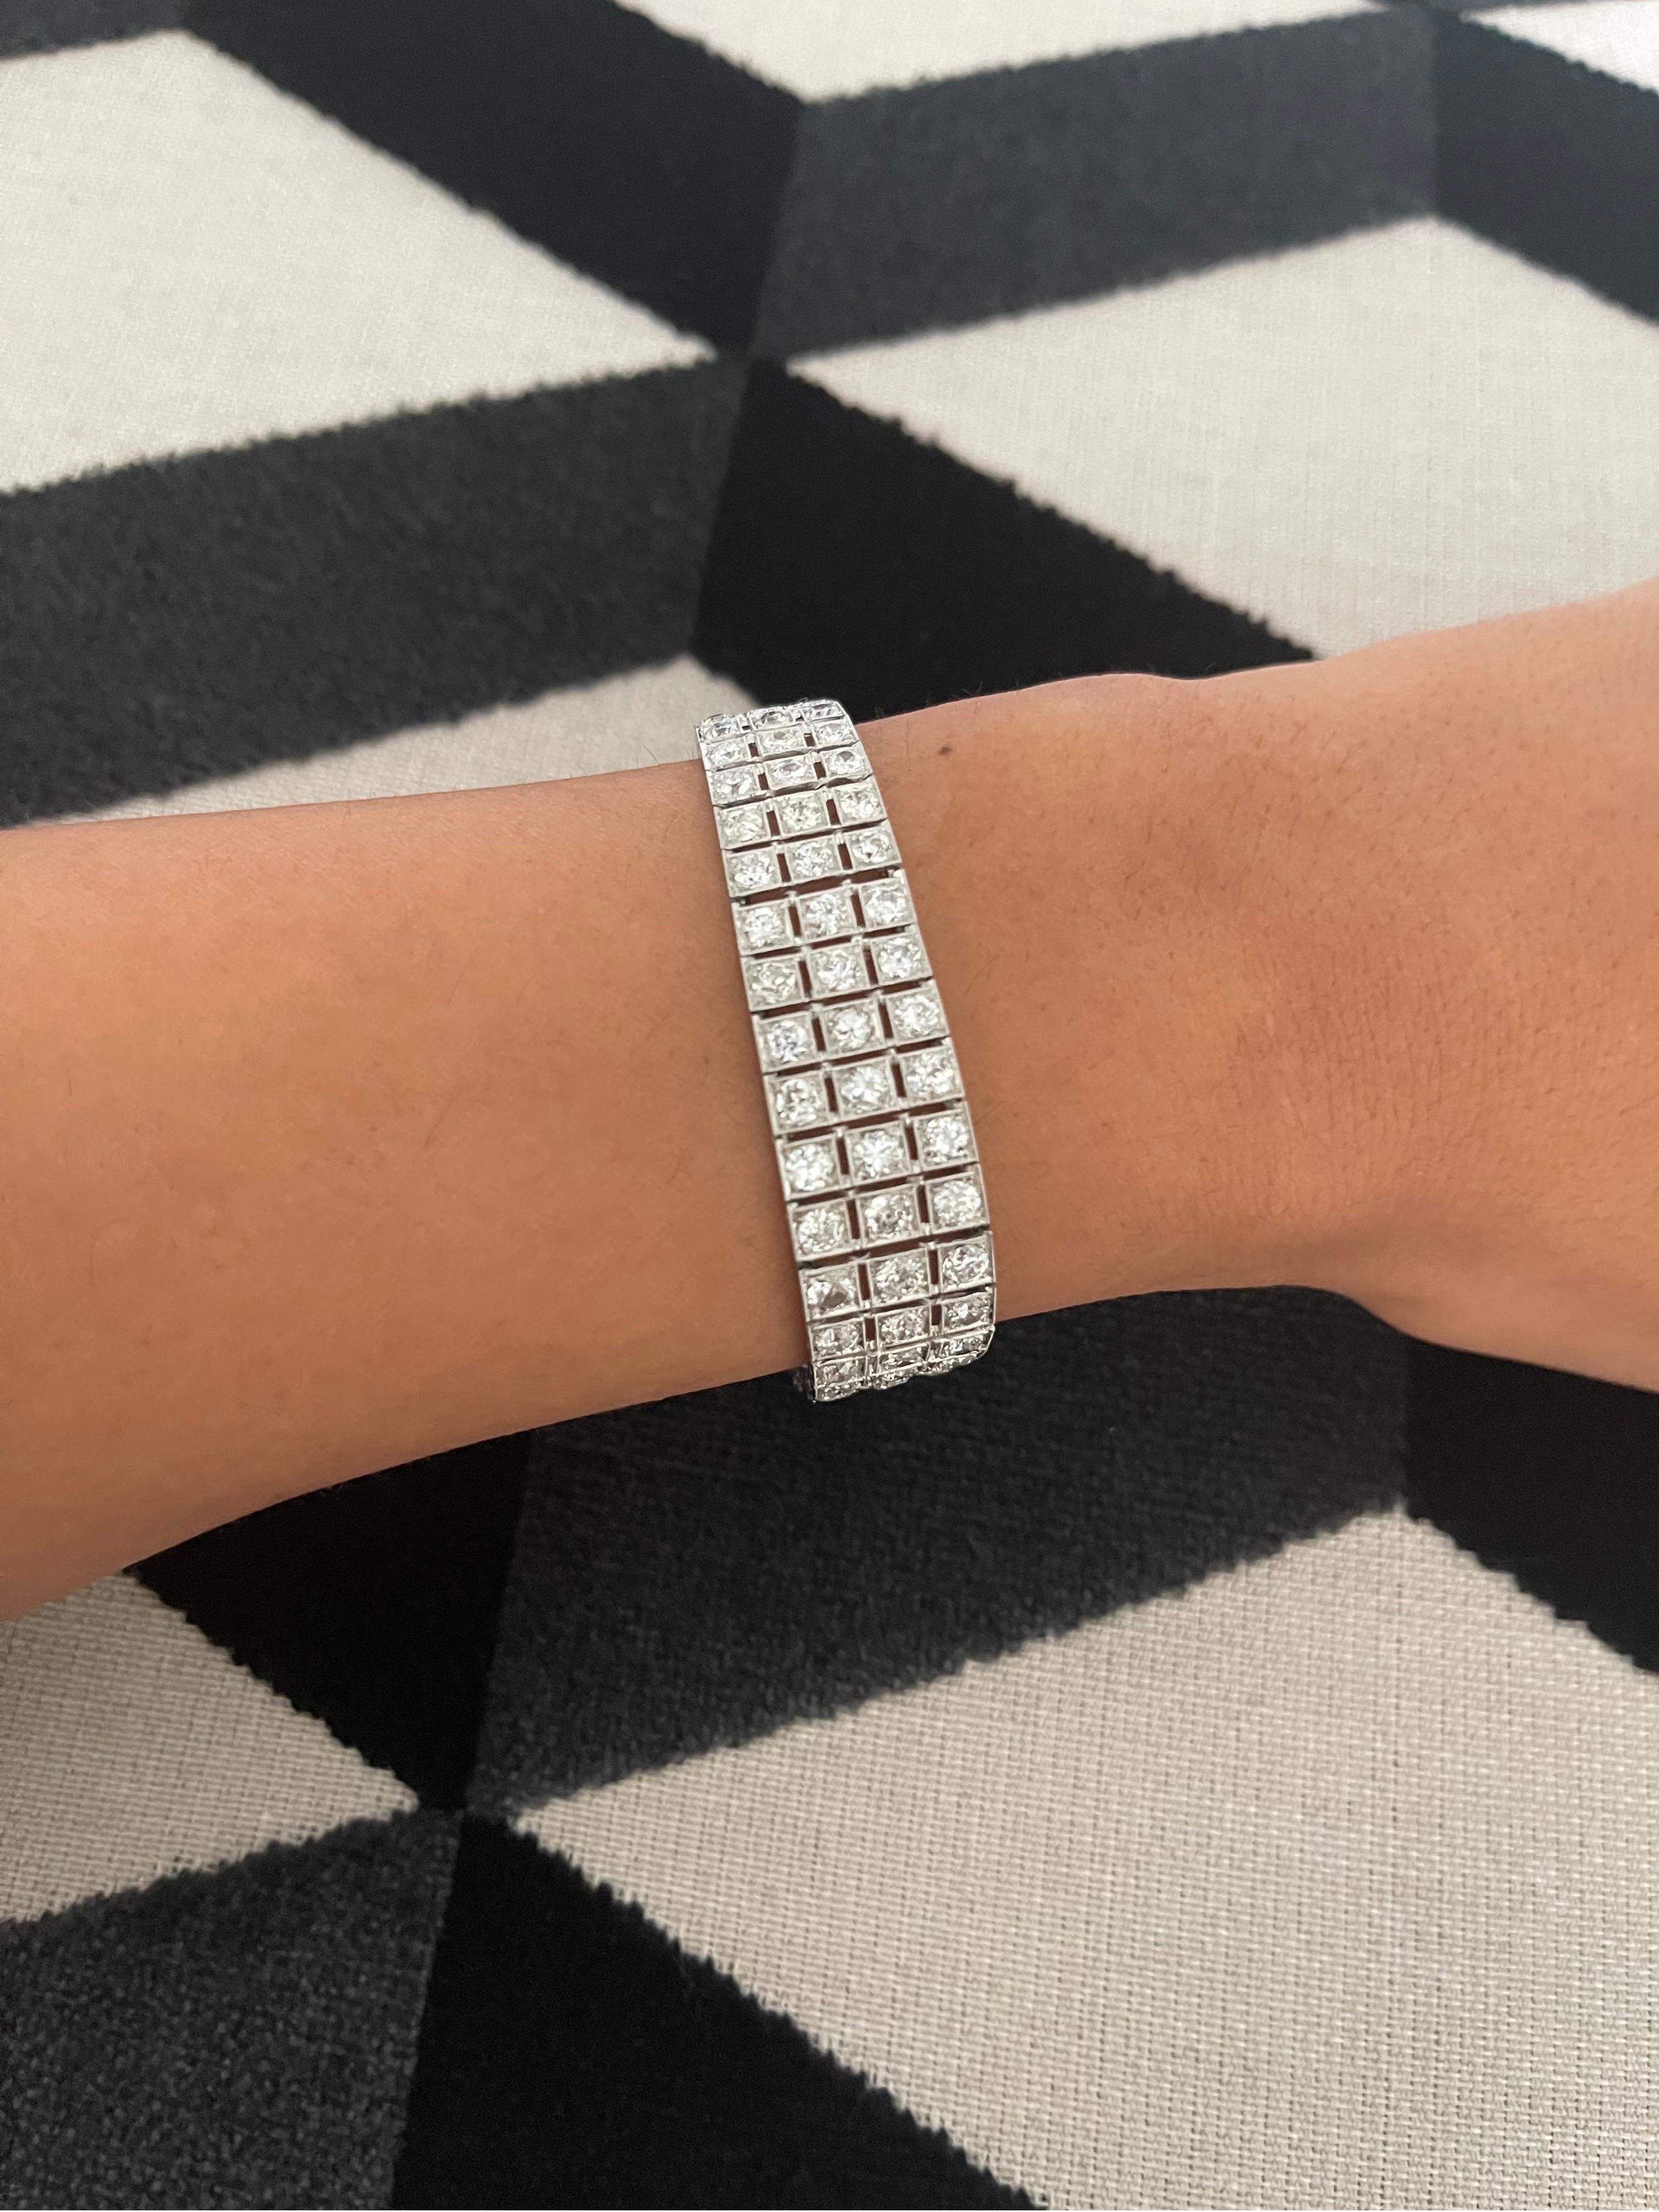 This exquisite, original Art Deco Diamond bracelet contains three rows of diamonds that go all the way around the bracelet, sparkling and shining brightly. This piece contains eight carats of 235 stunning Old European Cut diamonds, all graduated in